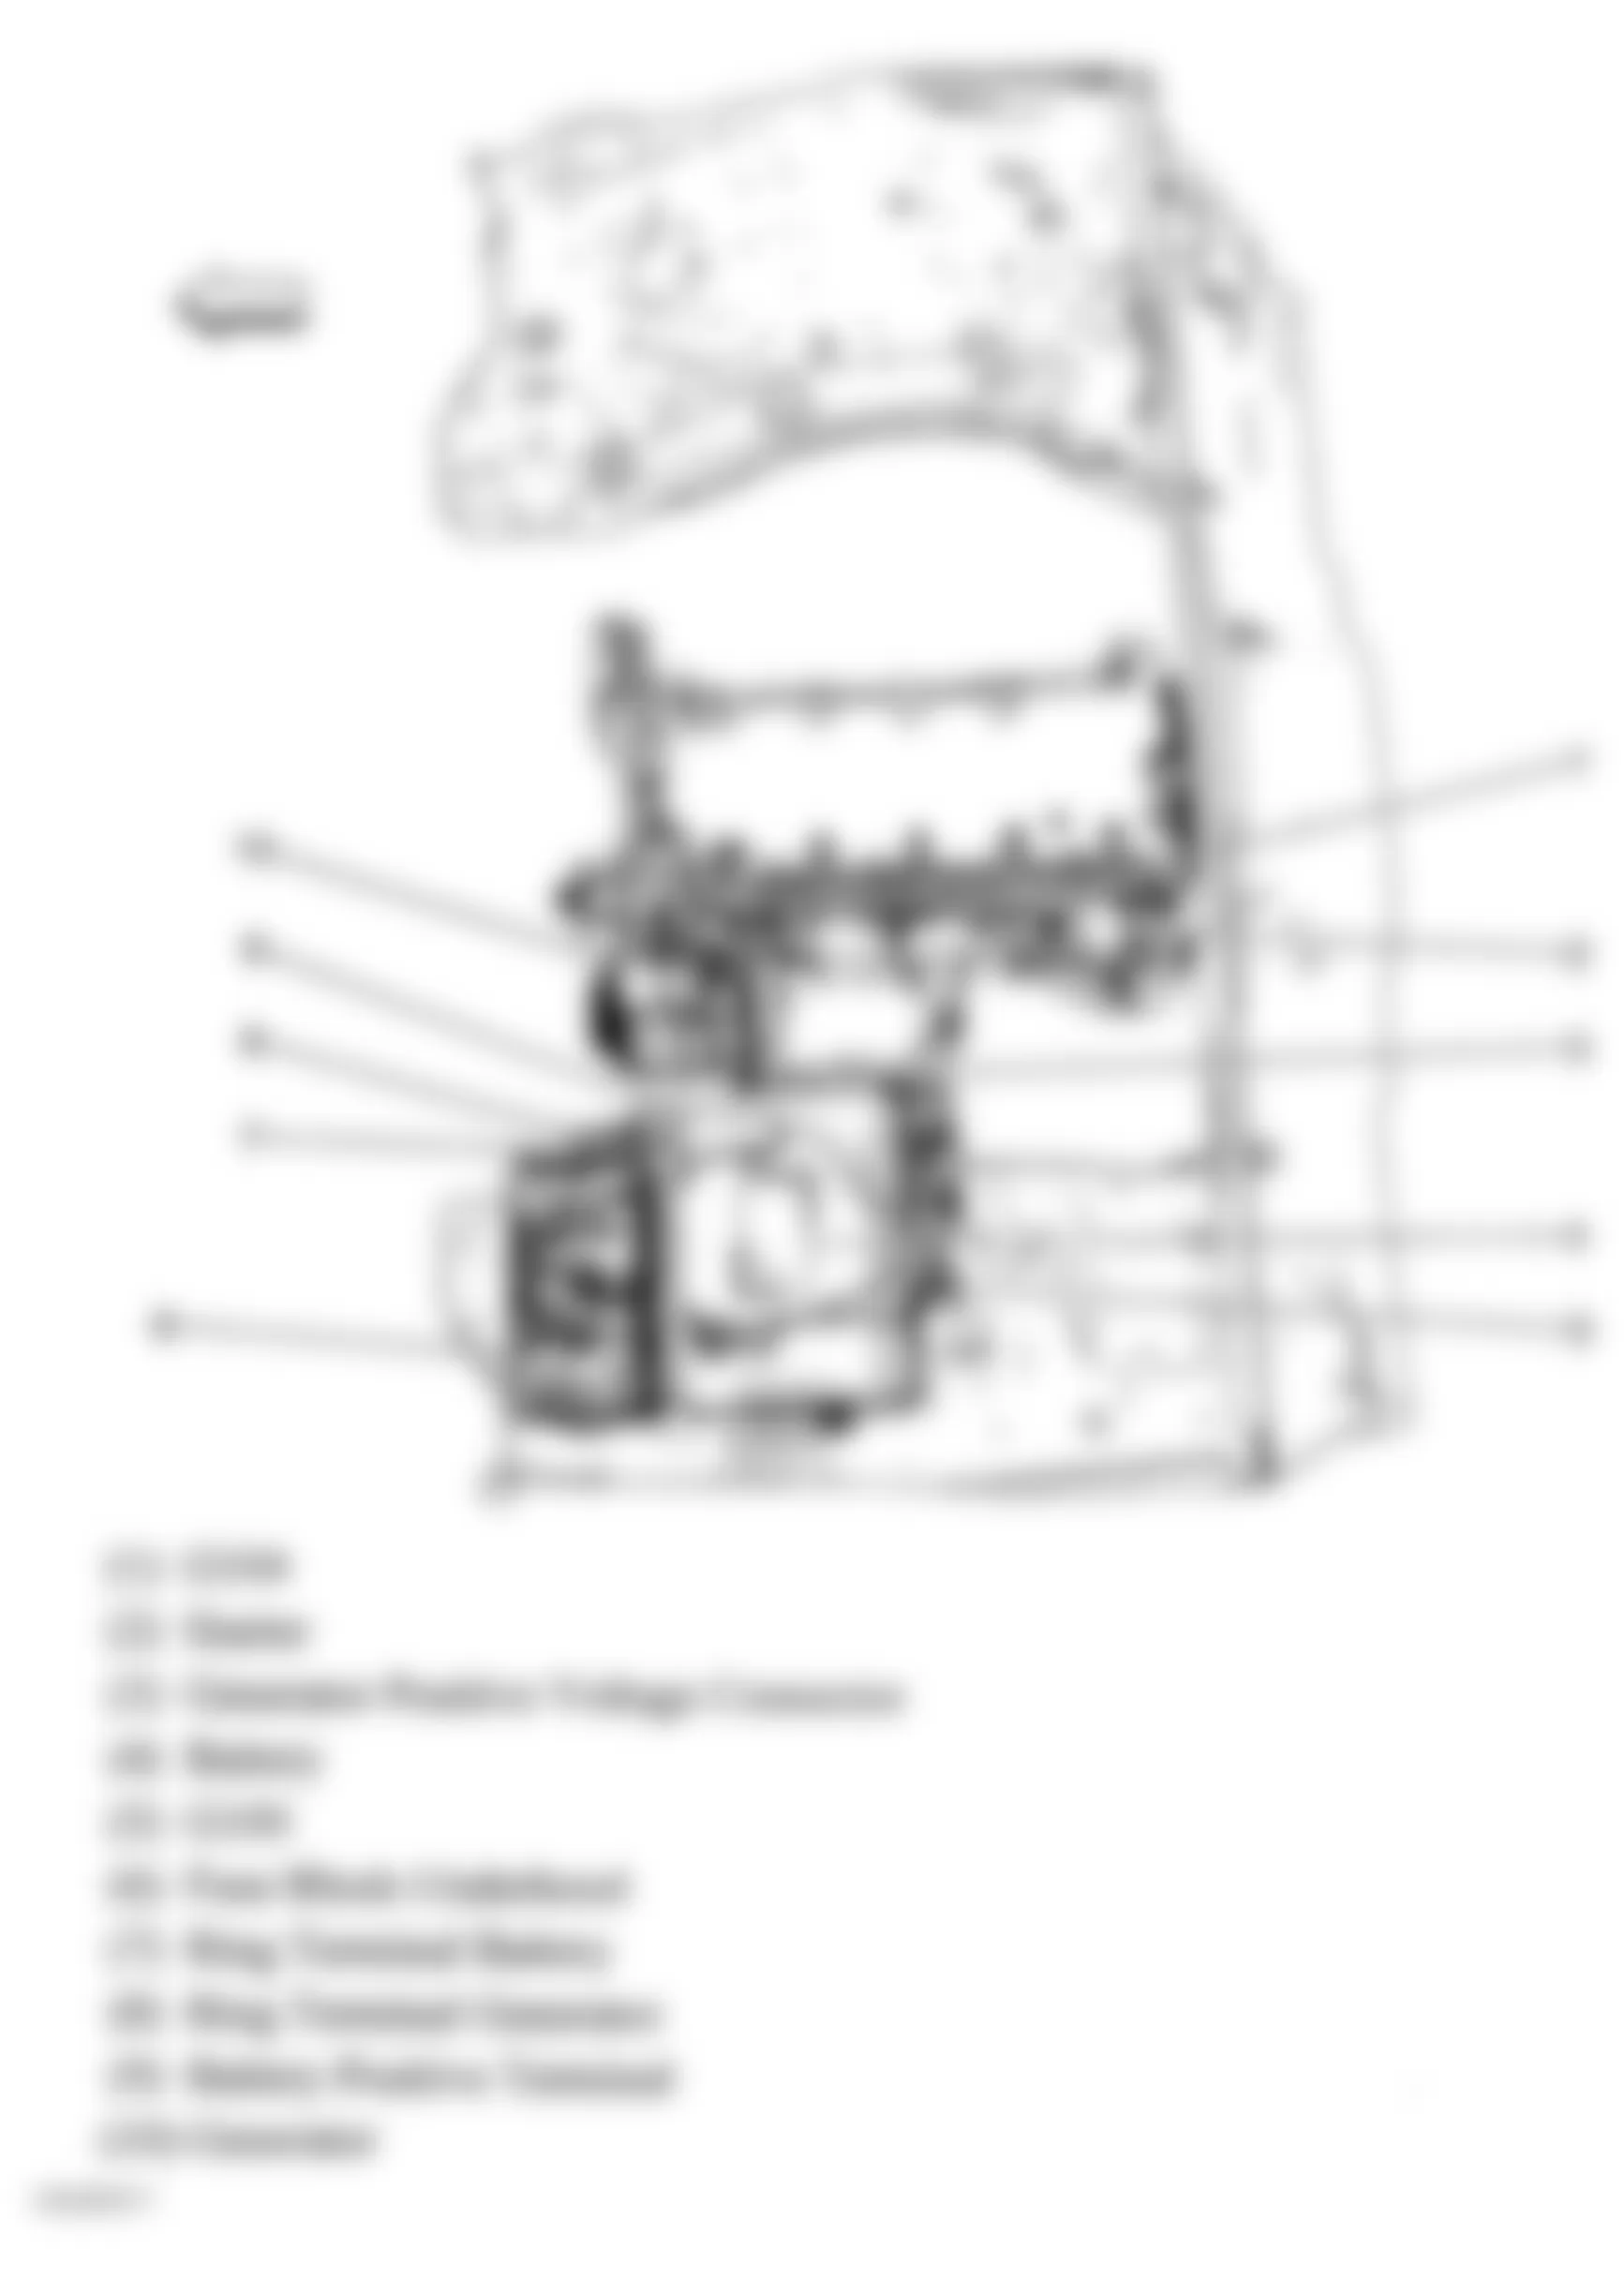 GMC Canyon 2004 - Component Locations -  Engine Compartment (Top View)